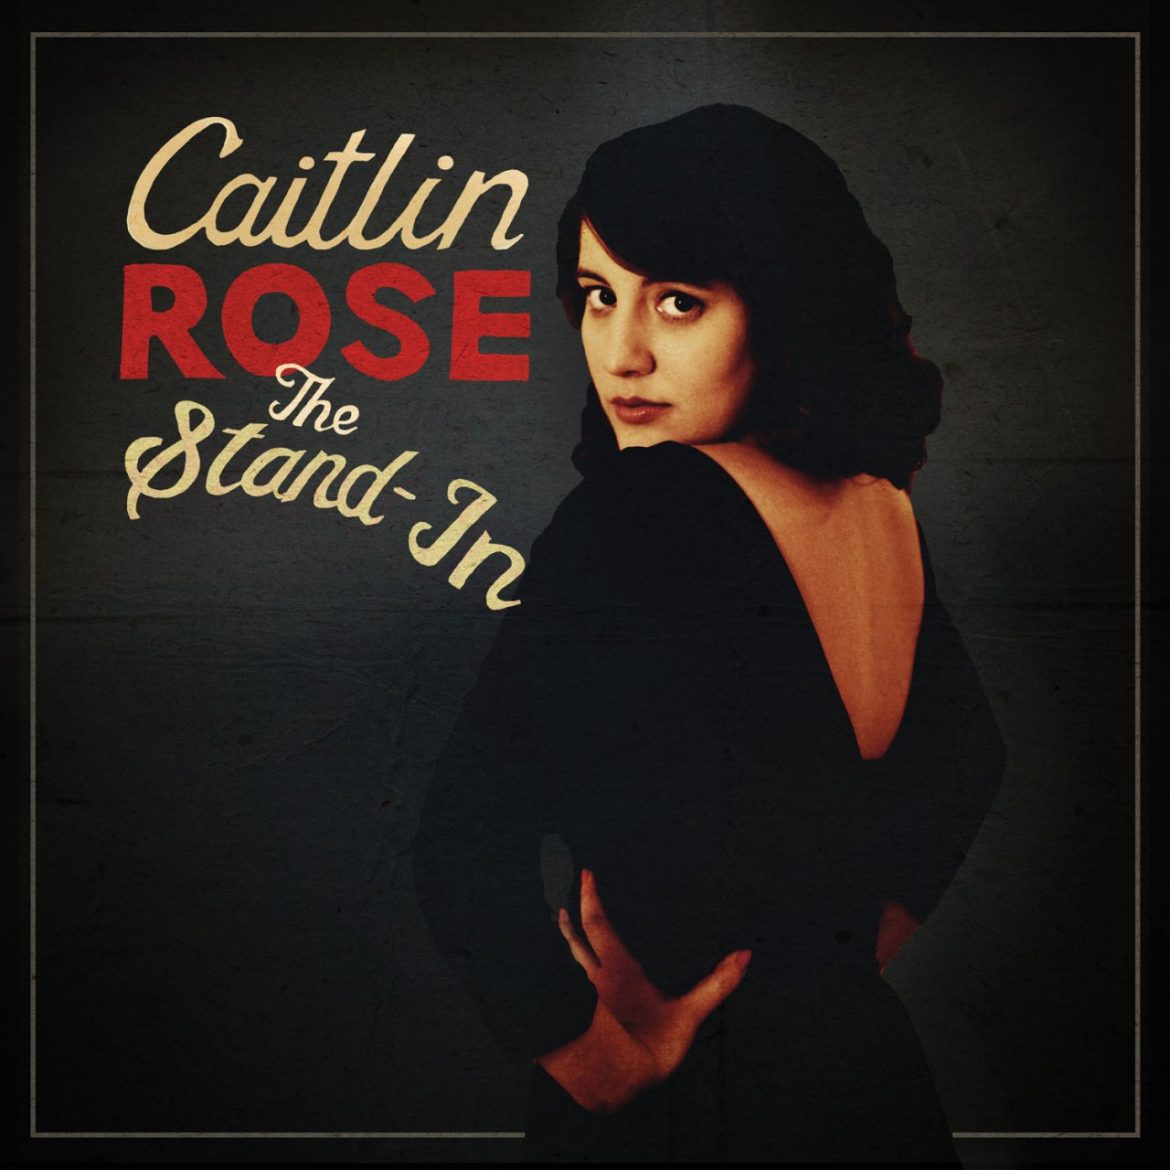 Caitlin Rose The Stand-In nuevo disco